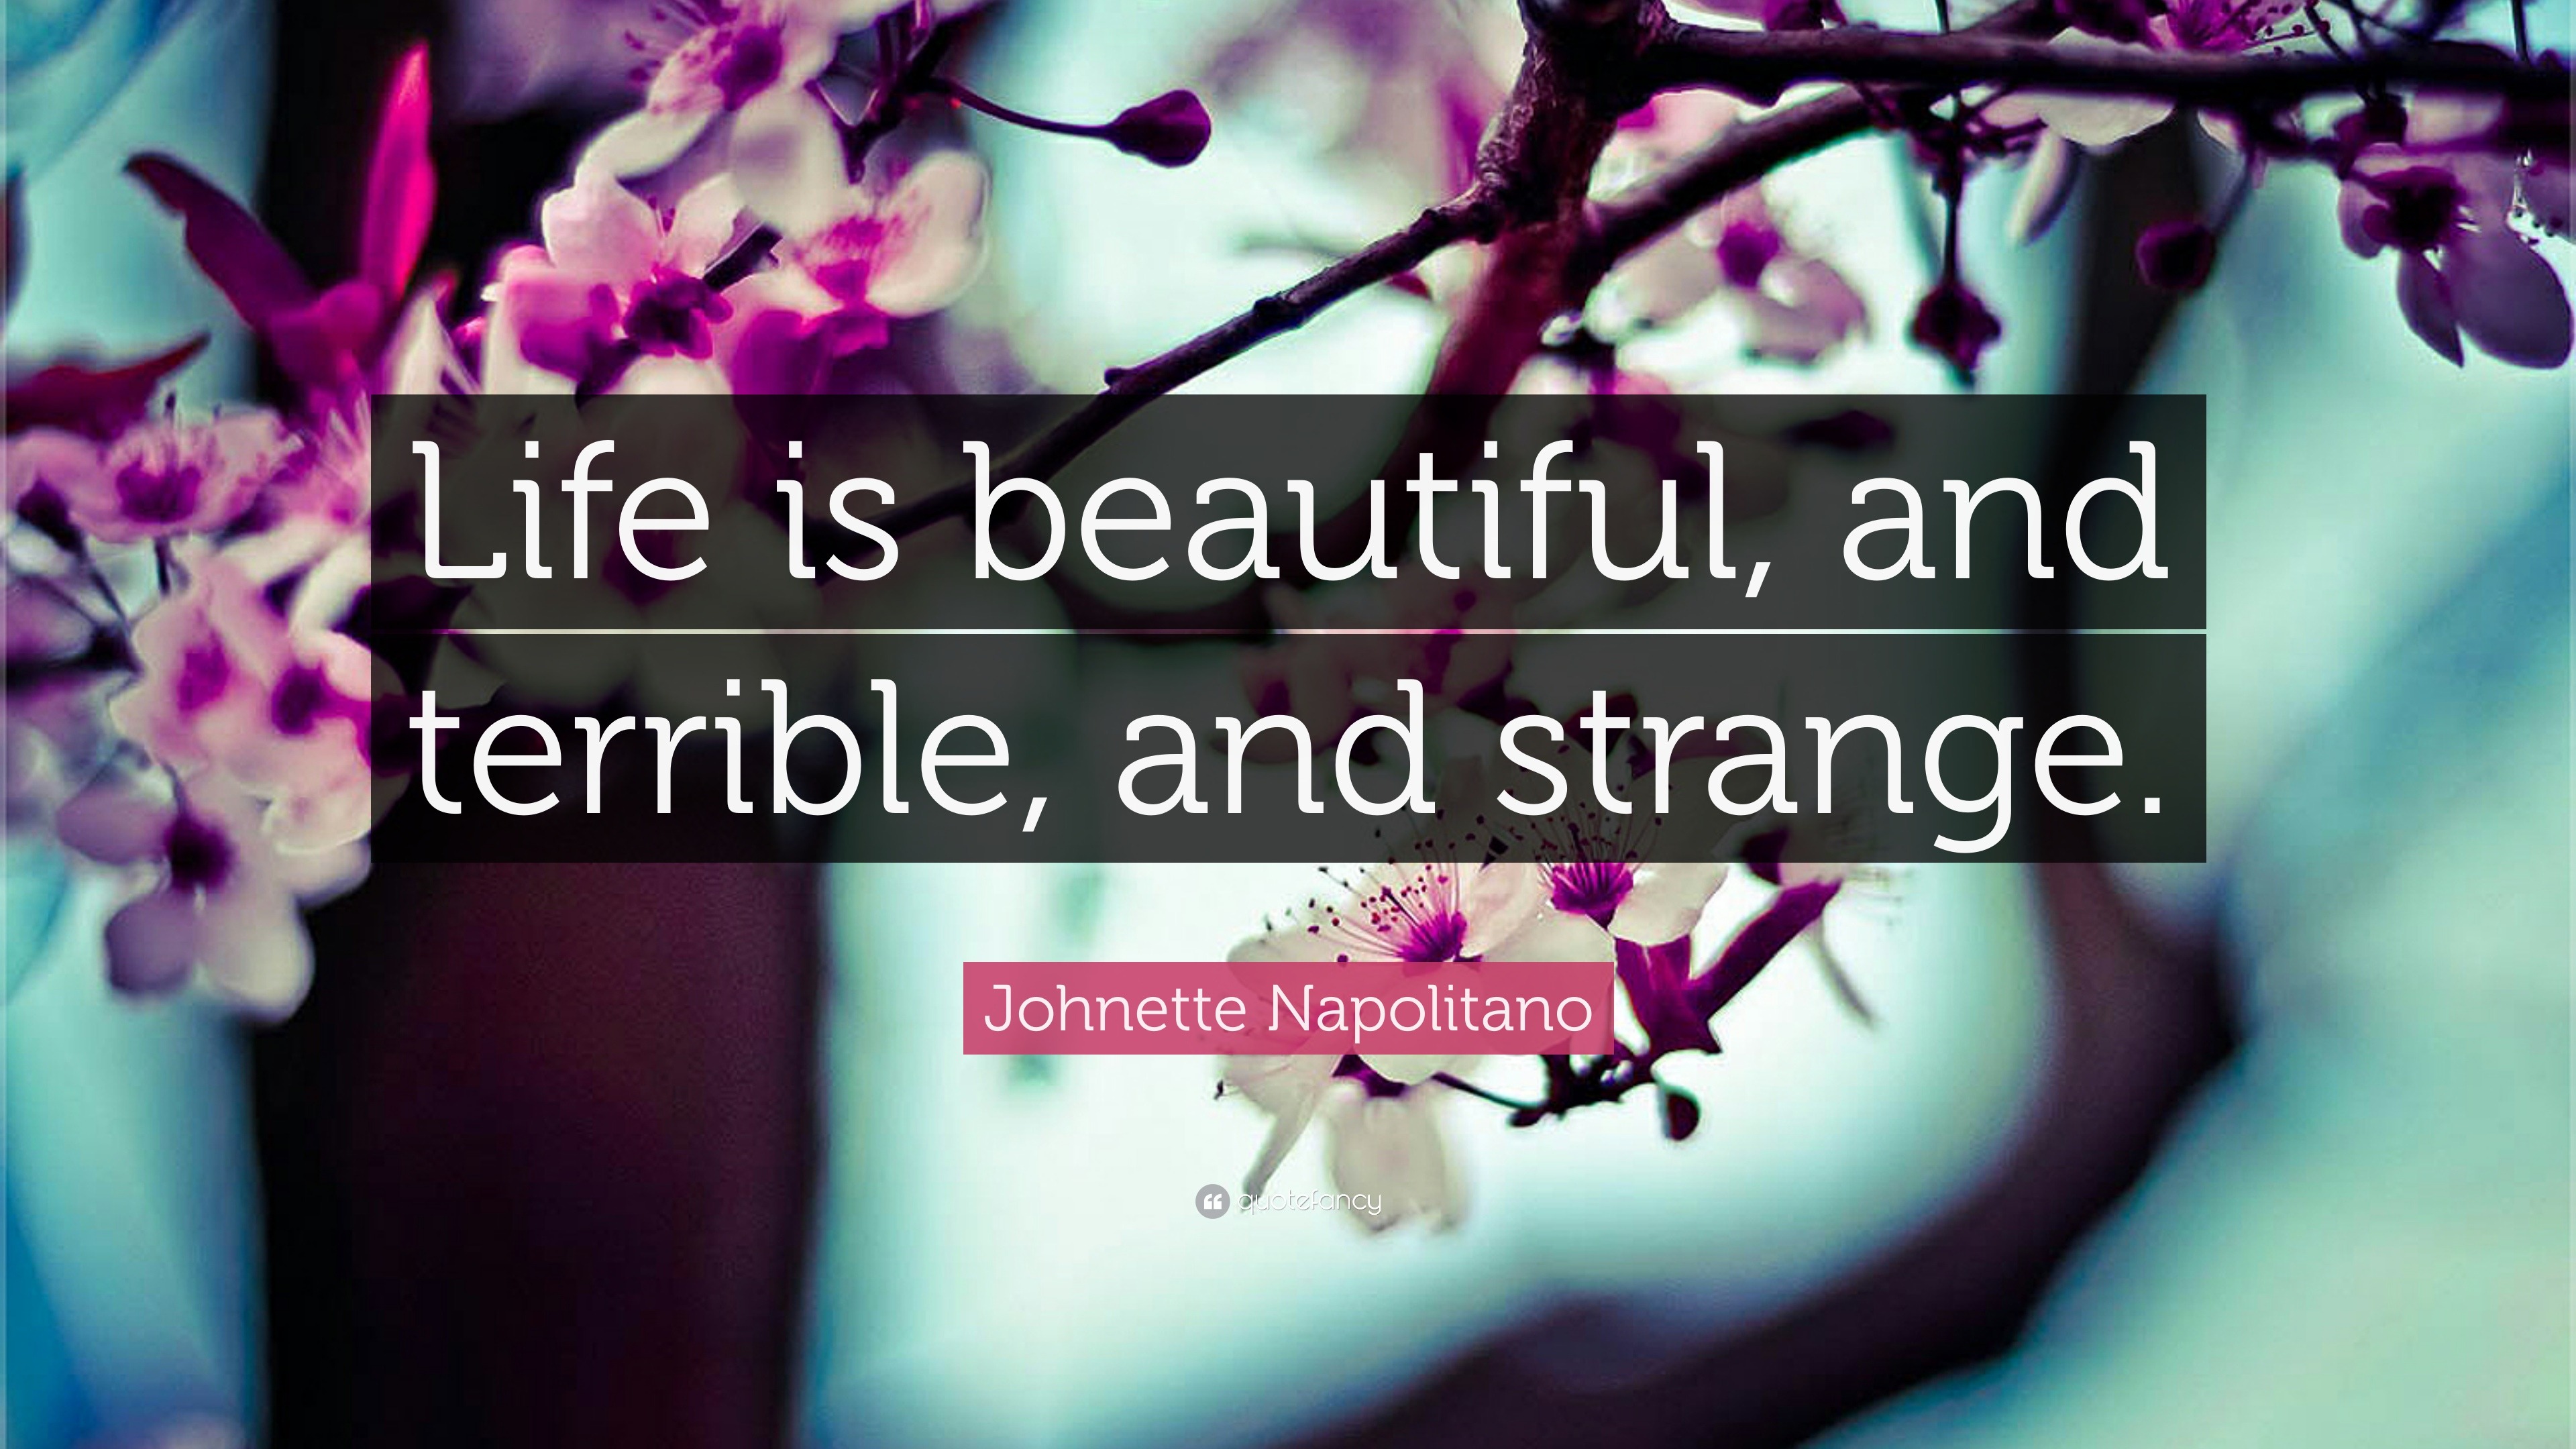 Johnette Napolitano Quote “Life is beautiful and terrible and strange ”